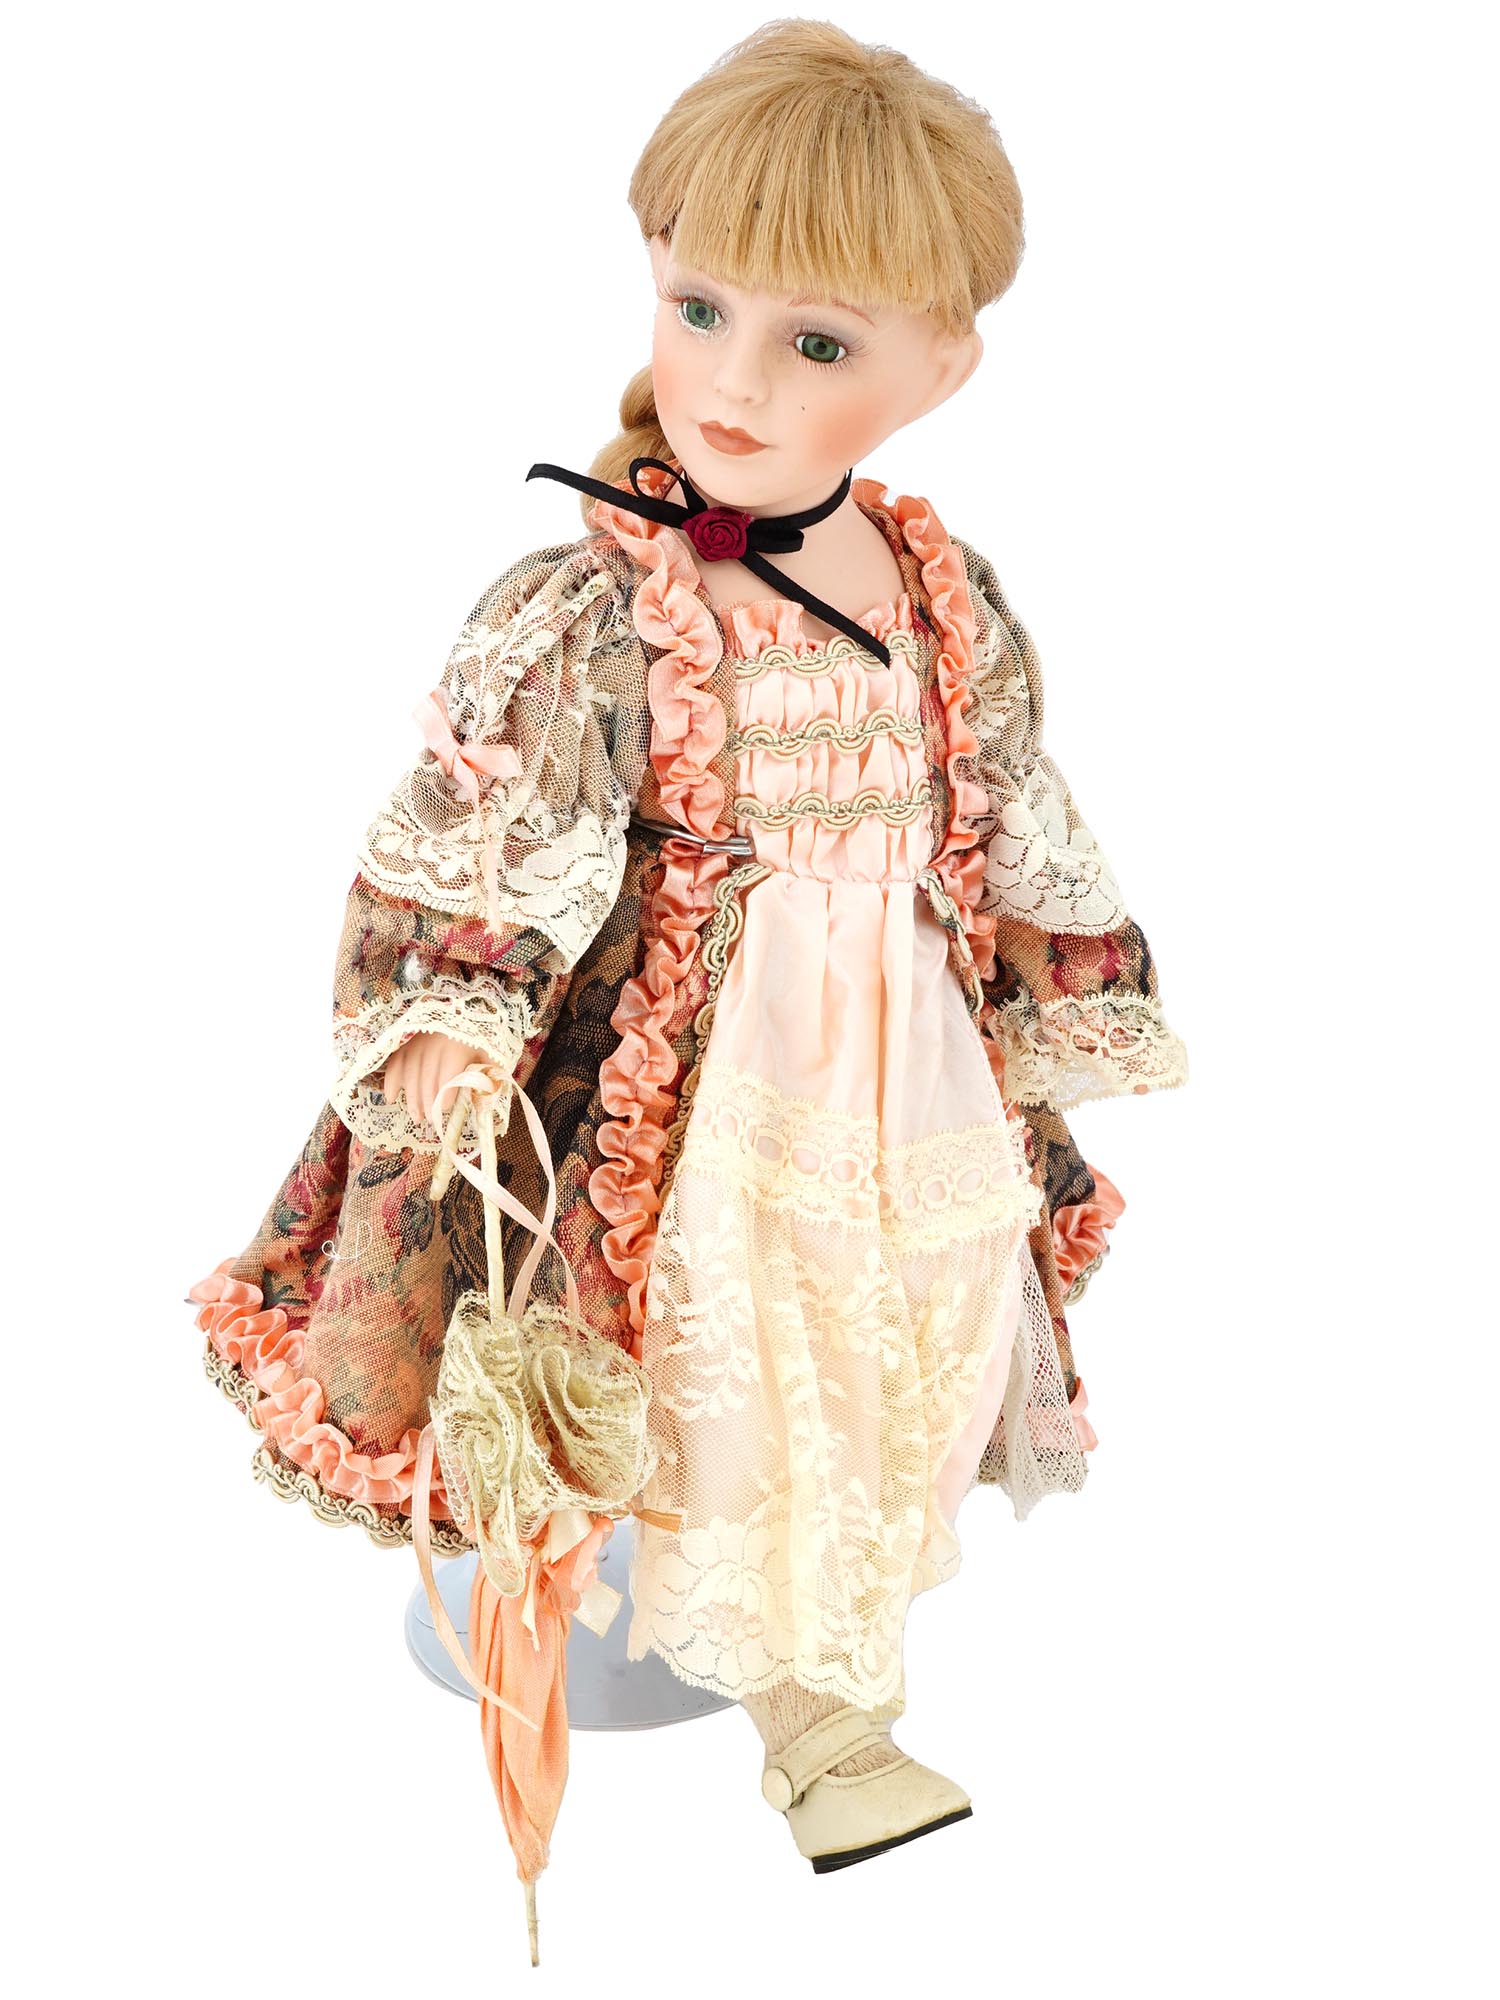 COLLECTION OF VINTAGE PORCELAIN DOLLS IN OUTFITS PIC-4